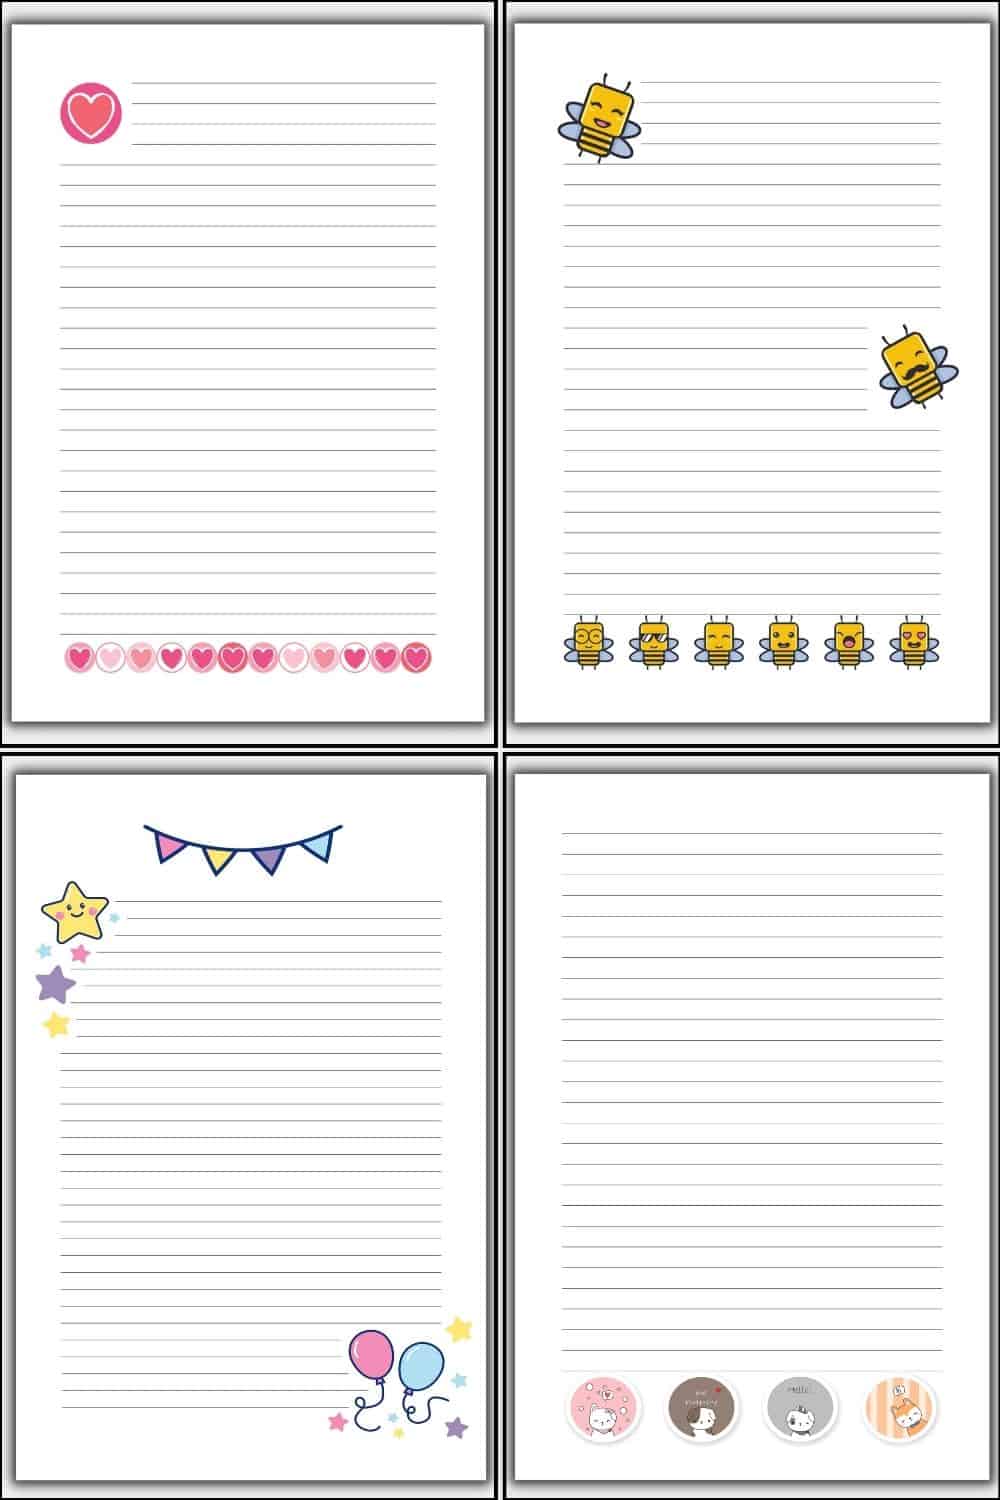 4 designs of cute lined paper printable templates.